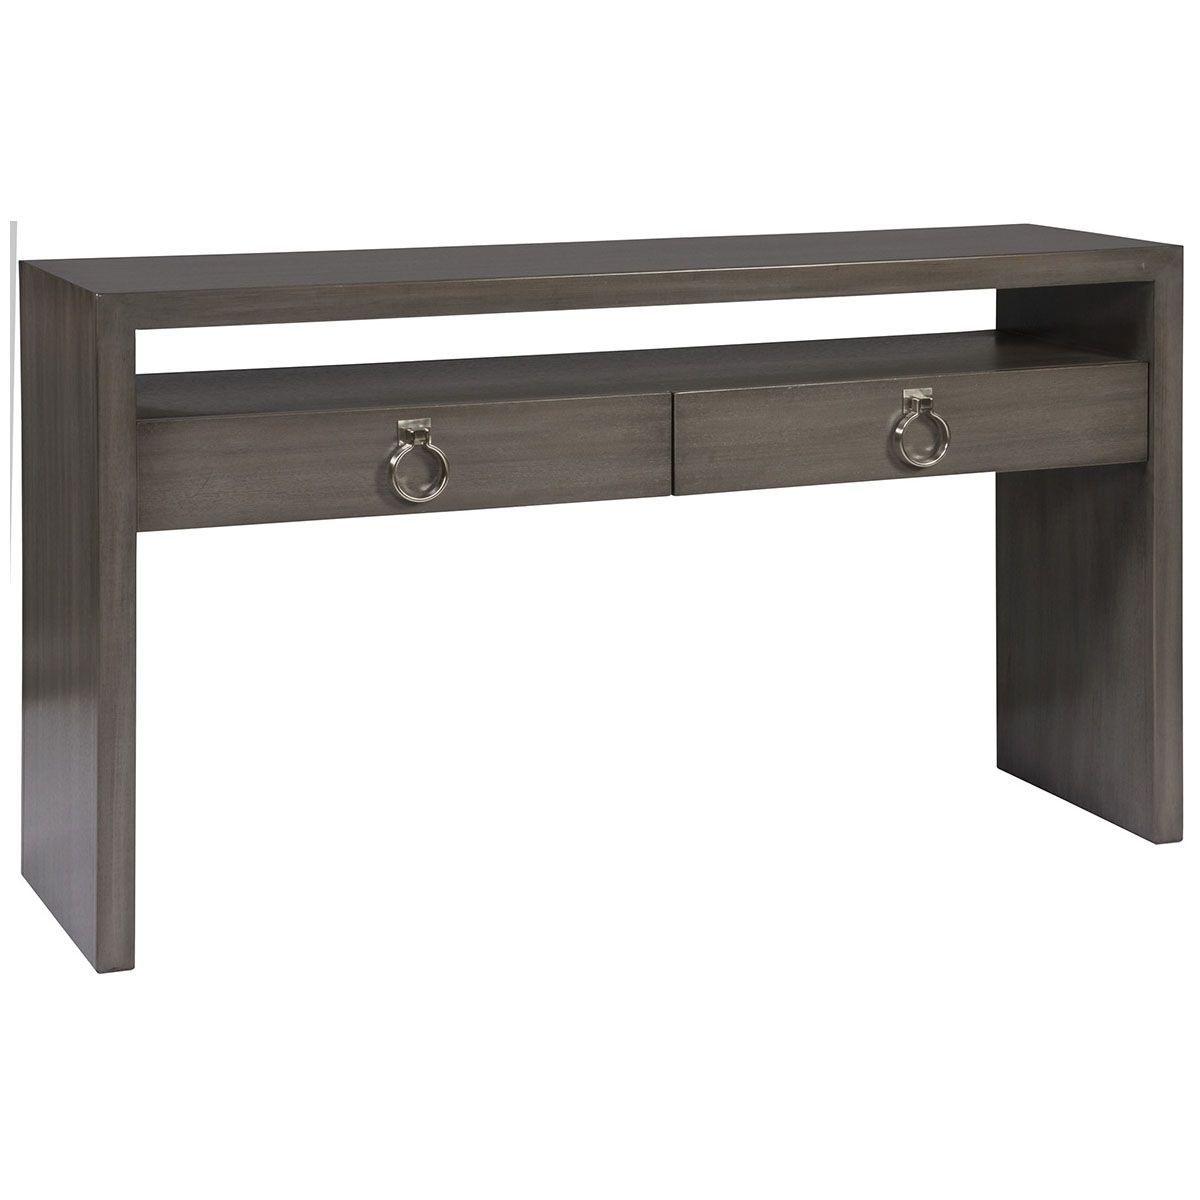 Vanguard Furniture Margo Console W349s Lg | Vanguad Furniture Pertaining To Parsons Concrete Top &amp; Dark Steel Base 48x16 Console Tables (View 6 of 30)